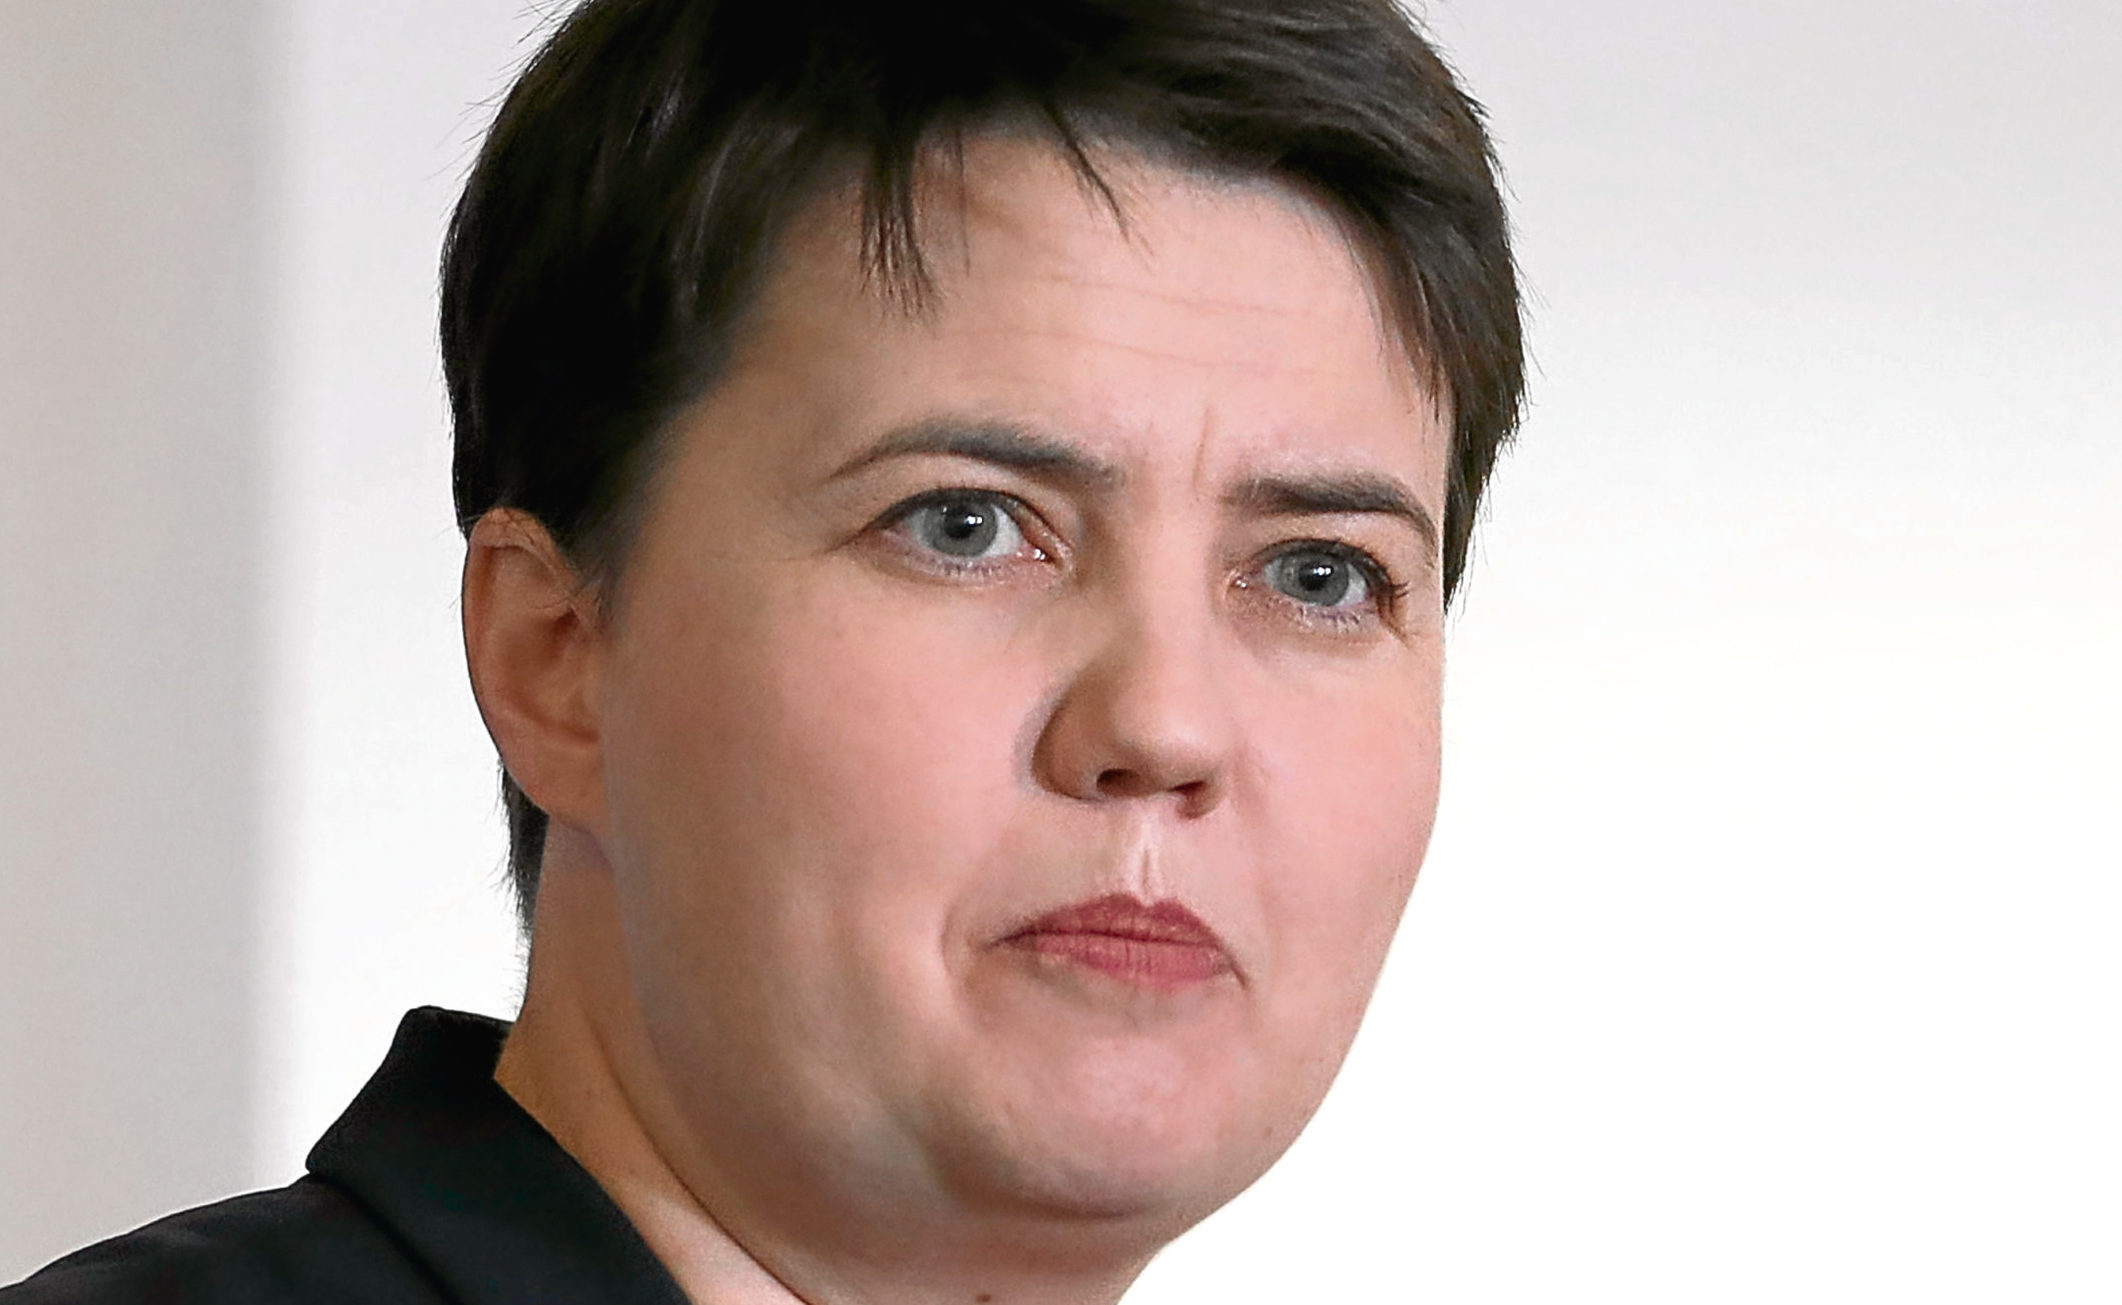 Scottish Conservative party leader Ruth Davidson (Jane Barlow / PA Wire)